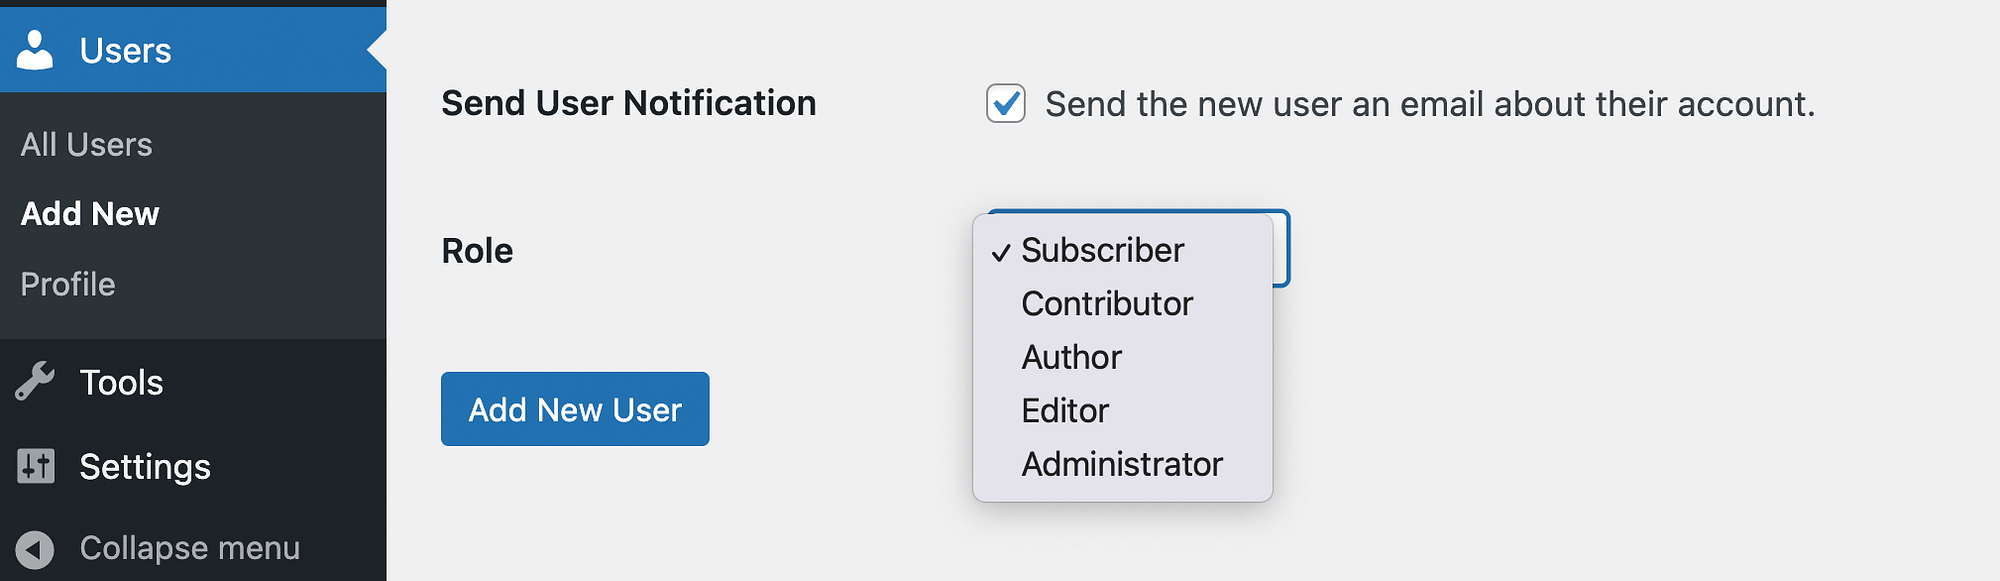 Assigning WordPress user permissions/roles in the dashboard.